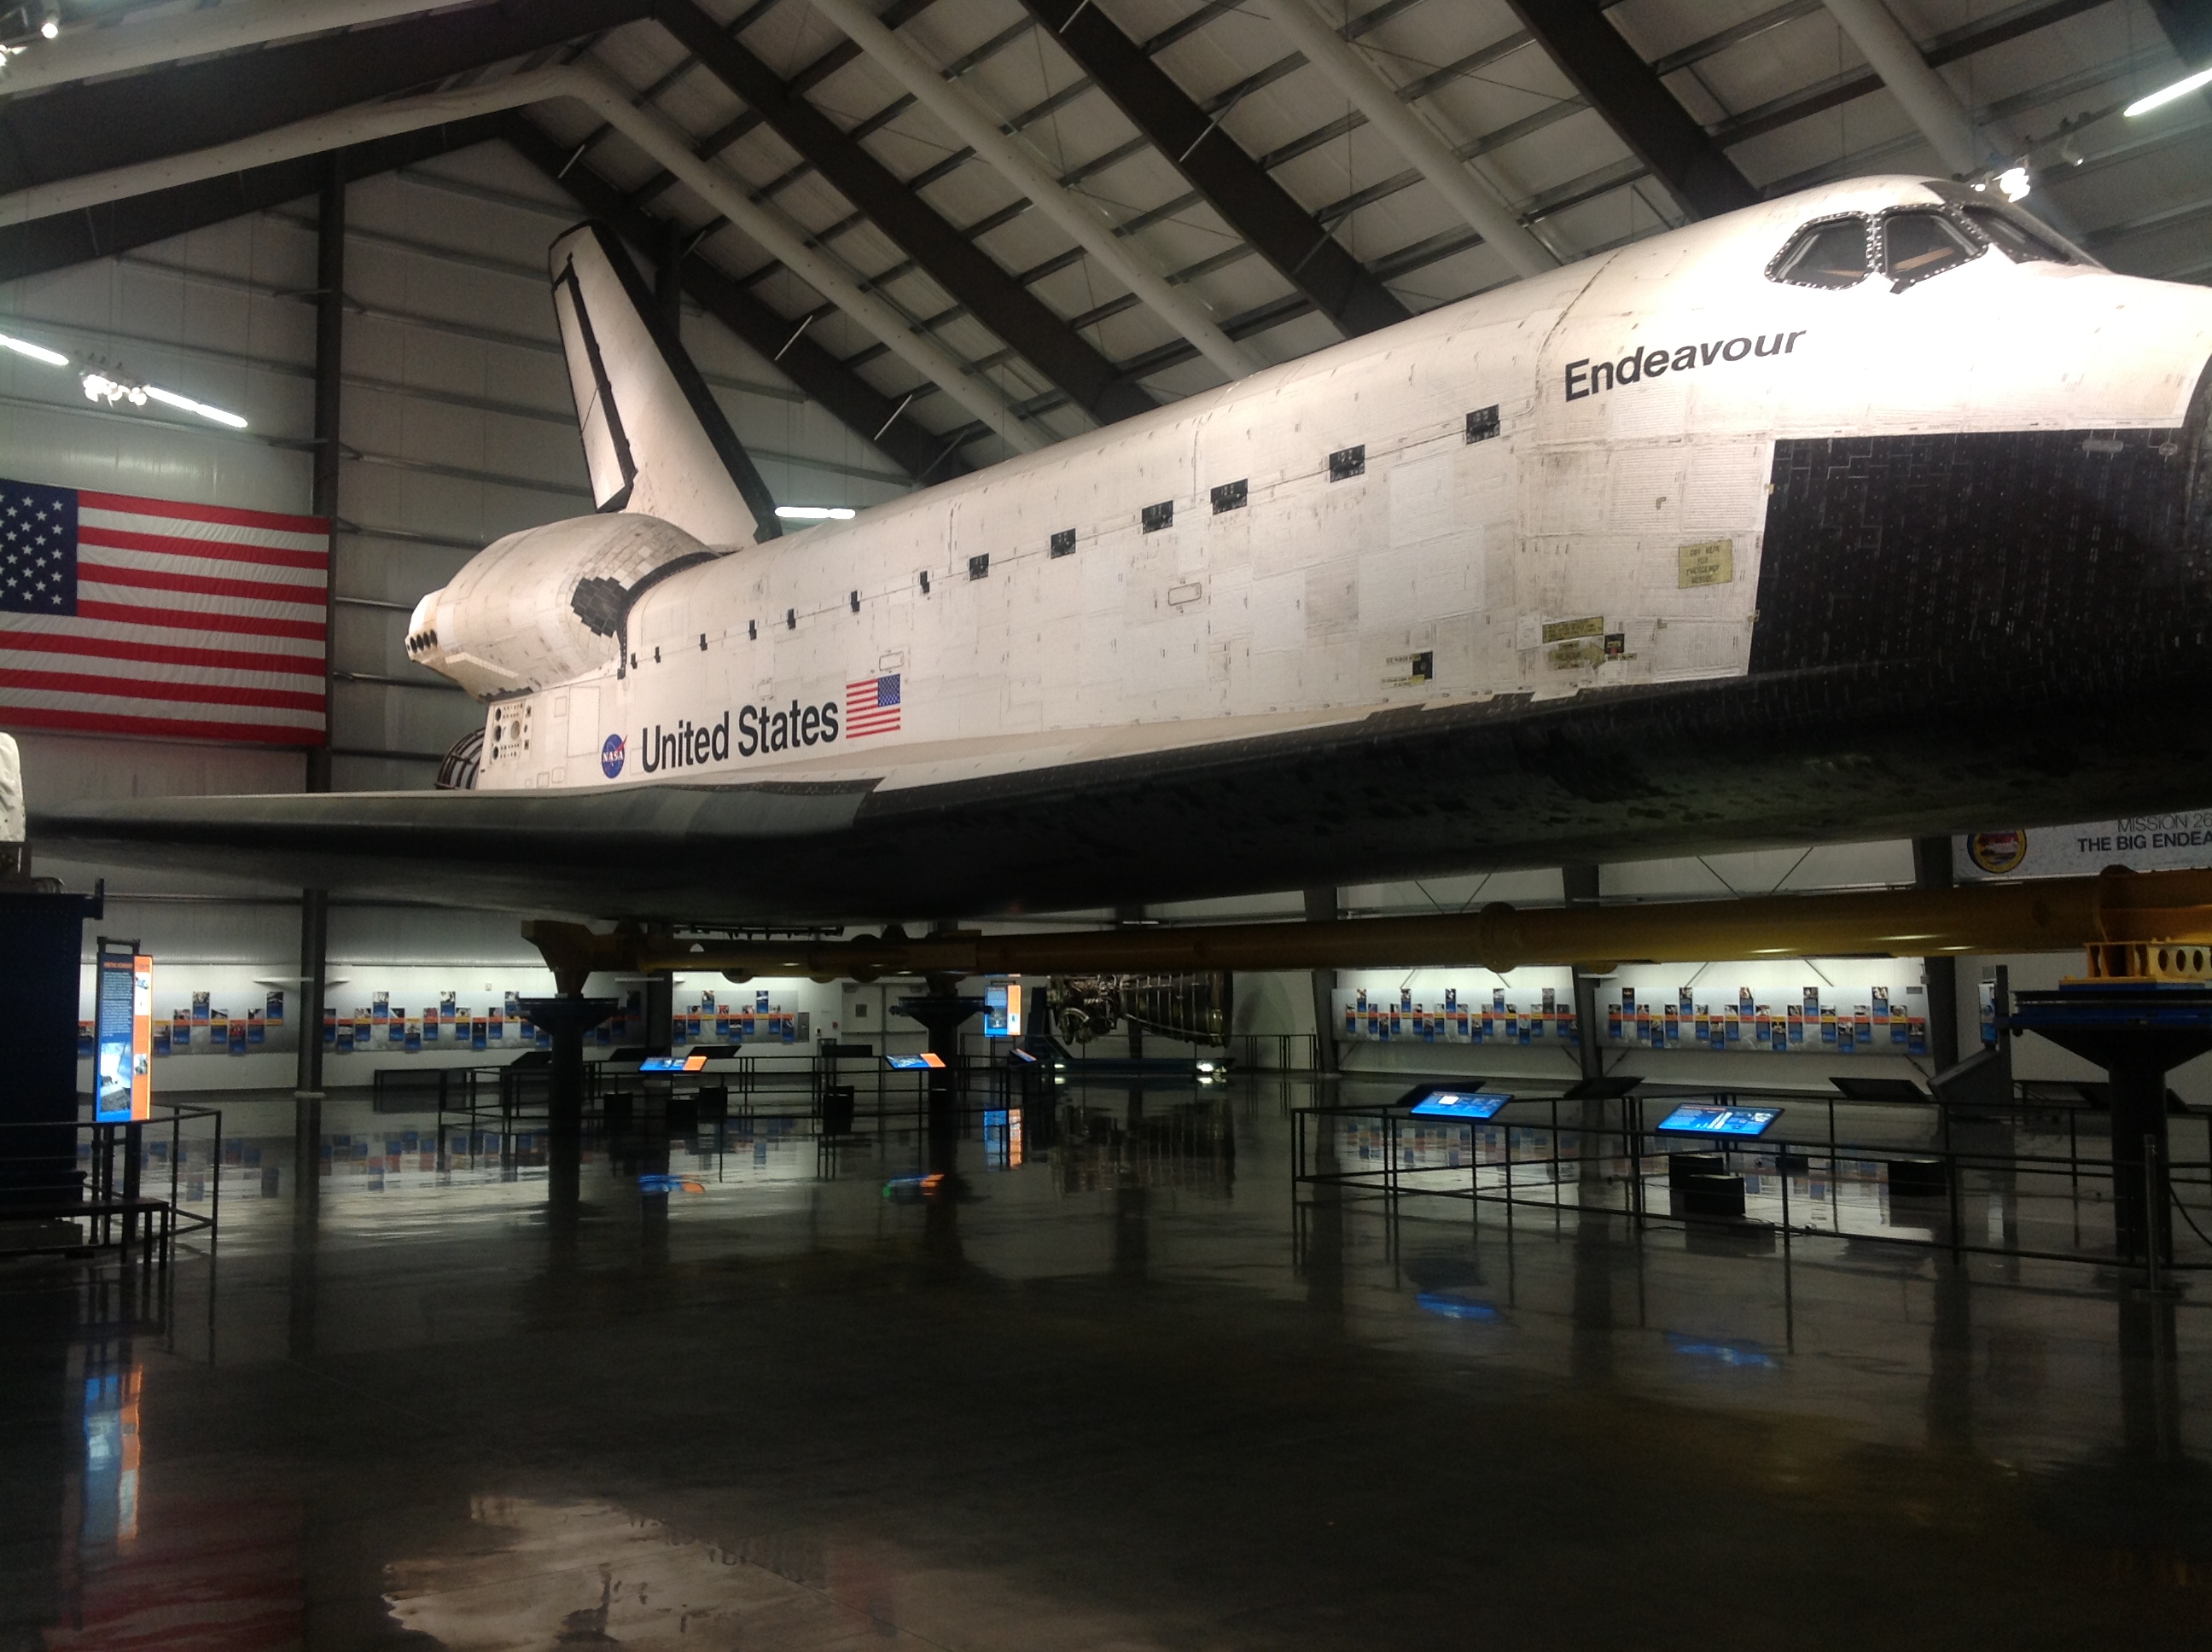 The space shuttle Endeavour.